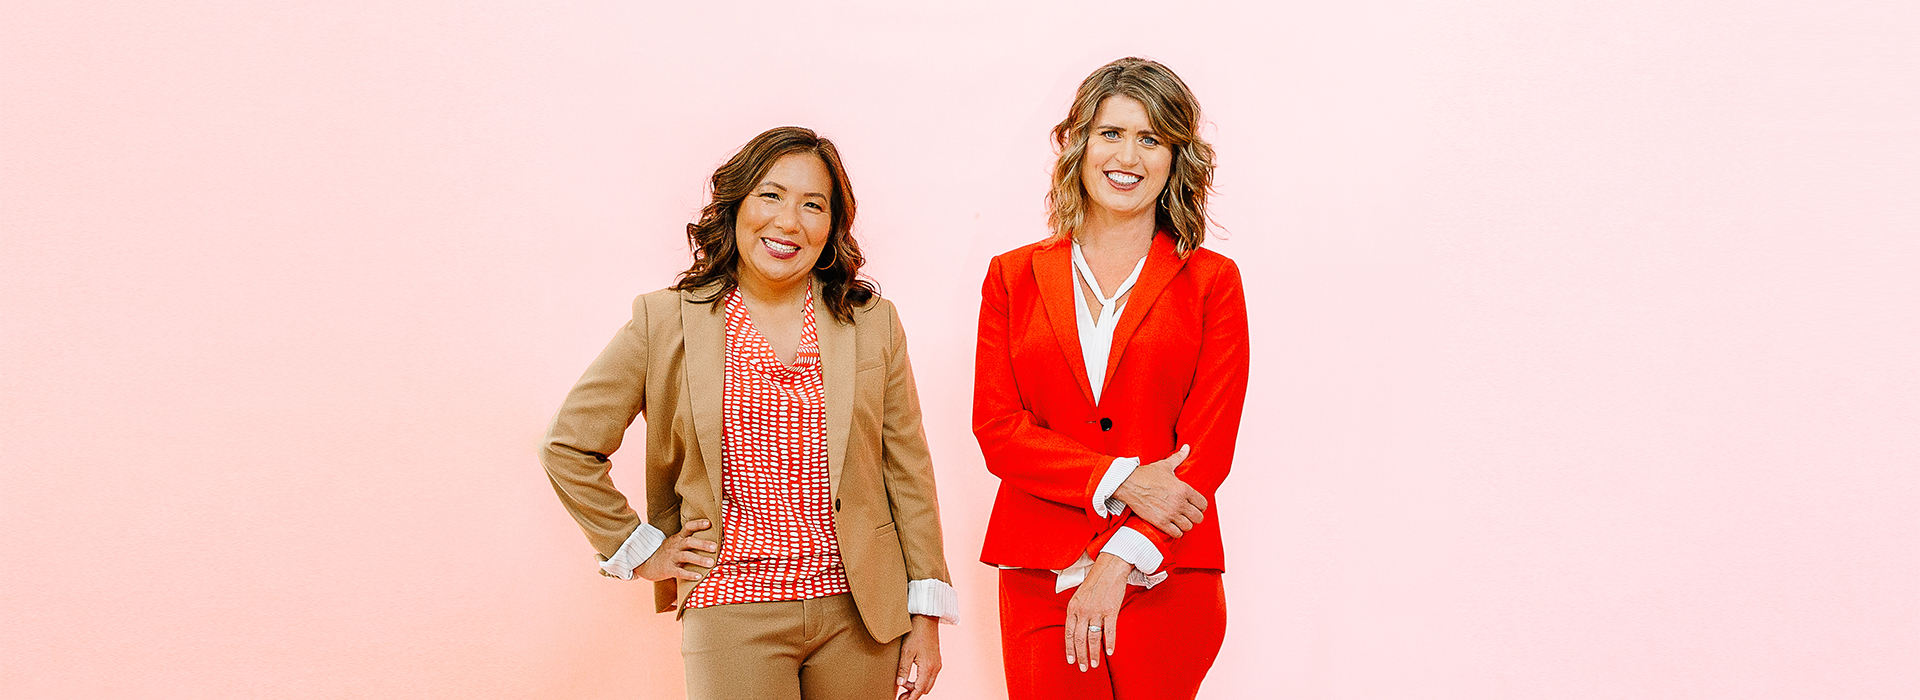 Shannon and Joanne standing in front of pink background